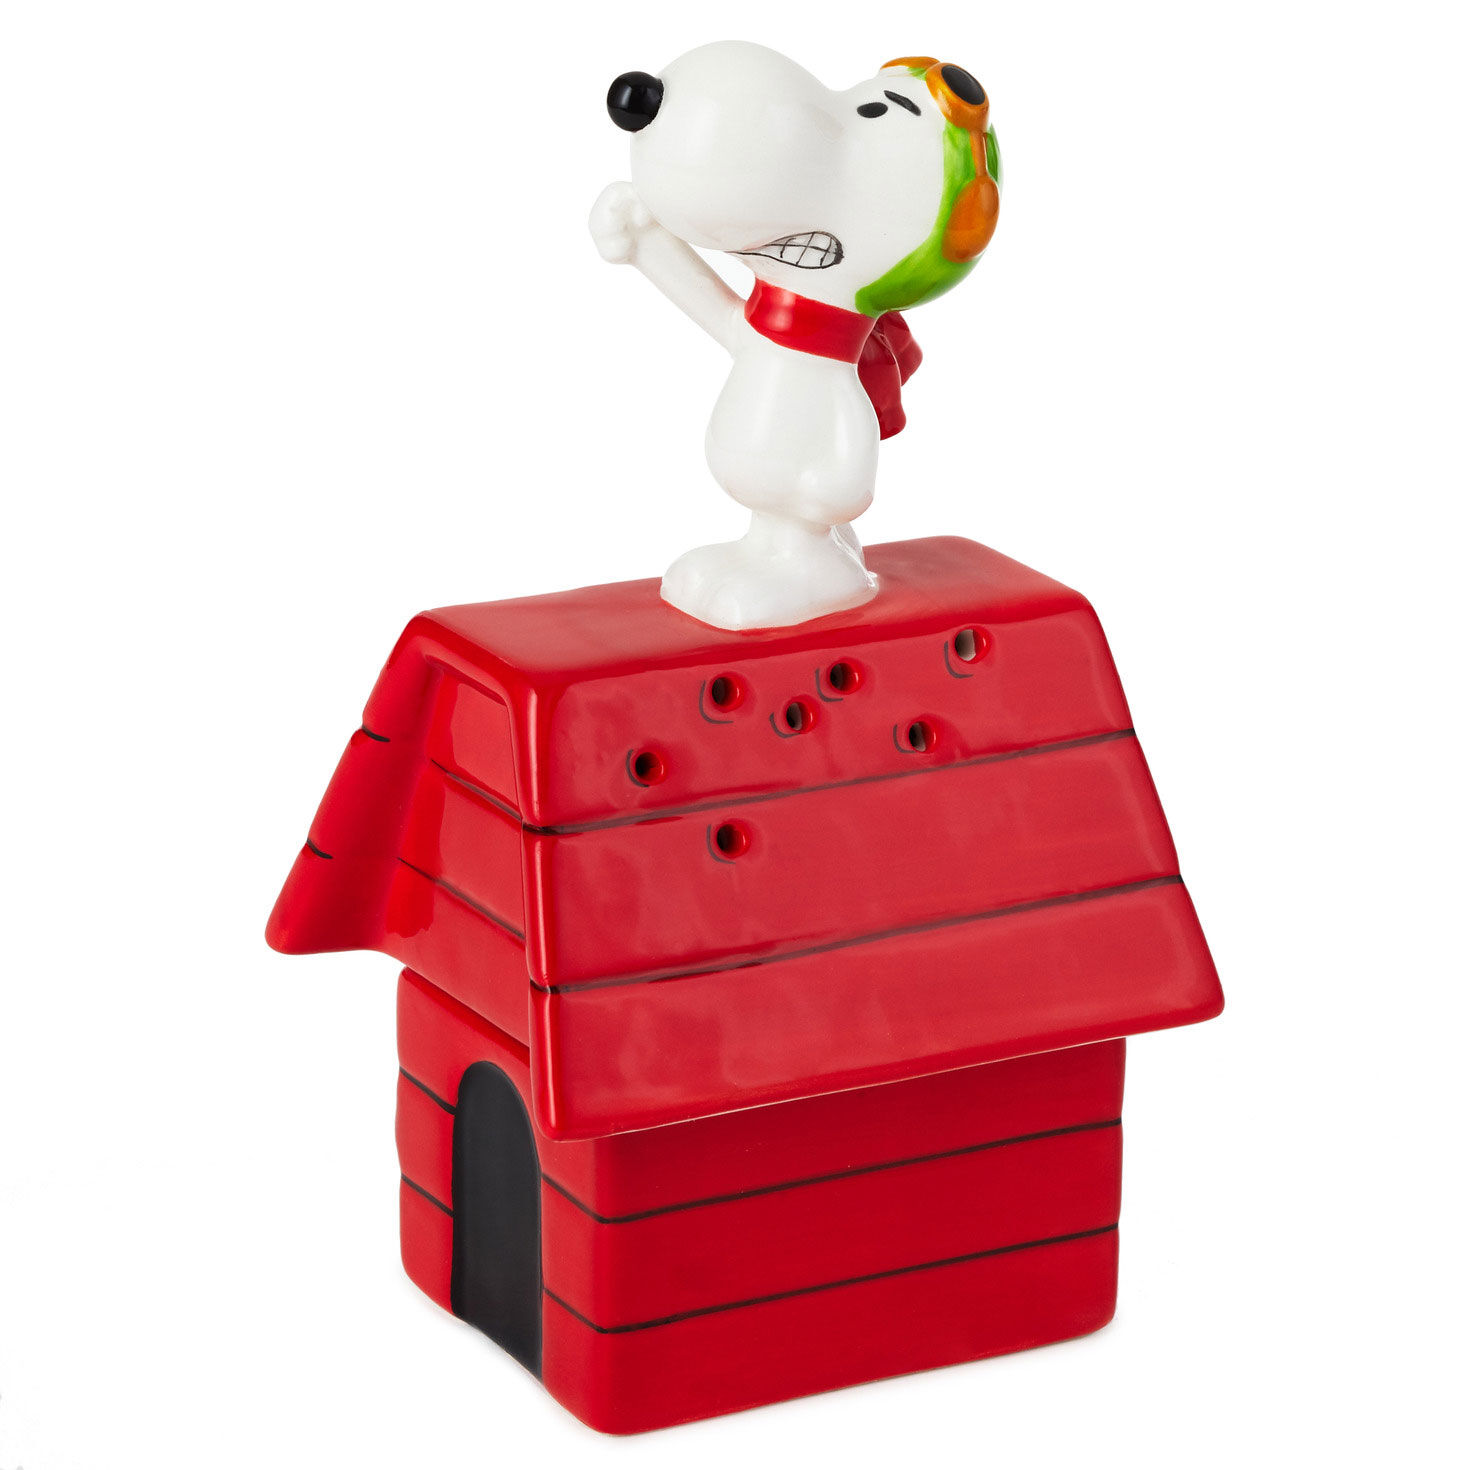 https://www.hallmark.com/dw/image/v2/AALB_PRD/on/demandware.static/-/Sites-hallmark-master/default/dw13e2dced/images/finished-goods/products/1PAJ3529/Peanuts-Snoopy-Doghouse-Salt-and-Pepper-Shakers_1PAJ3529_01.jpg?sfrm=jpg